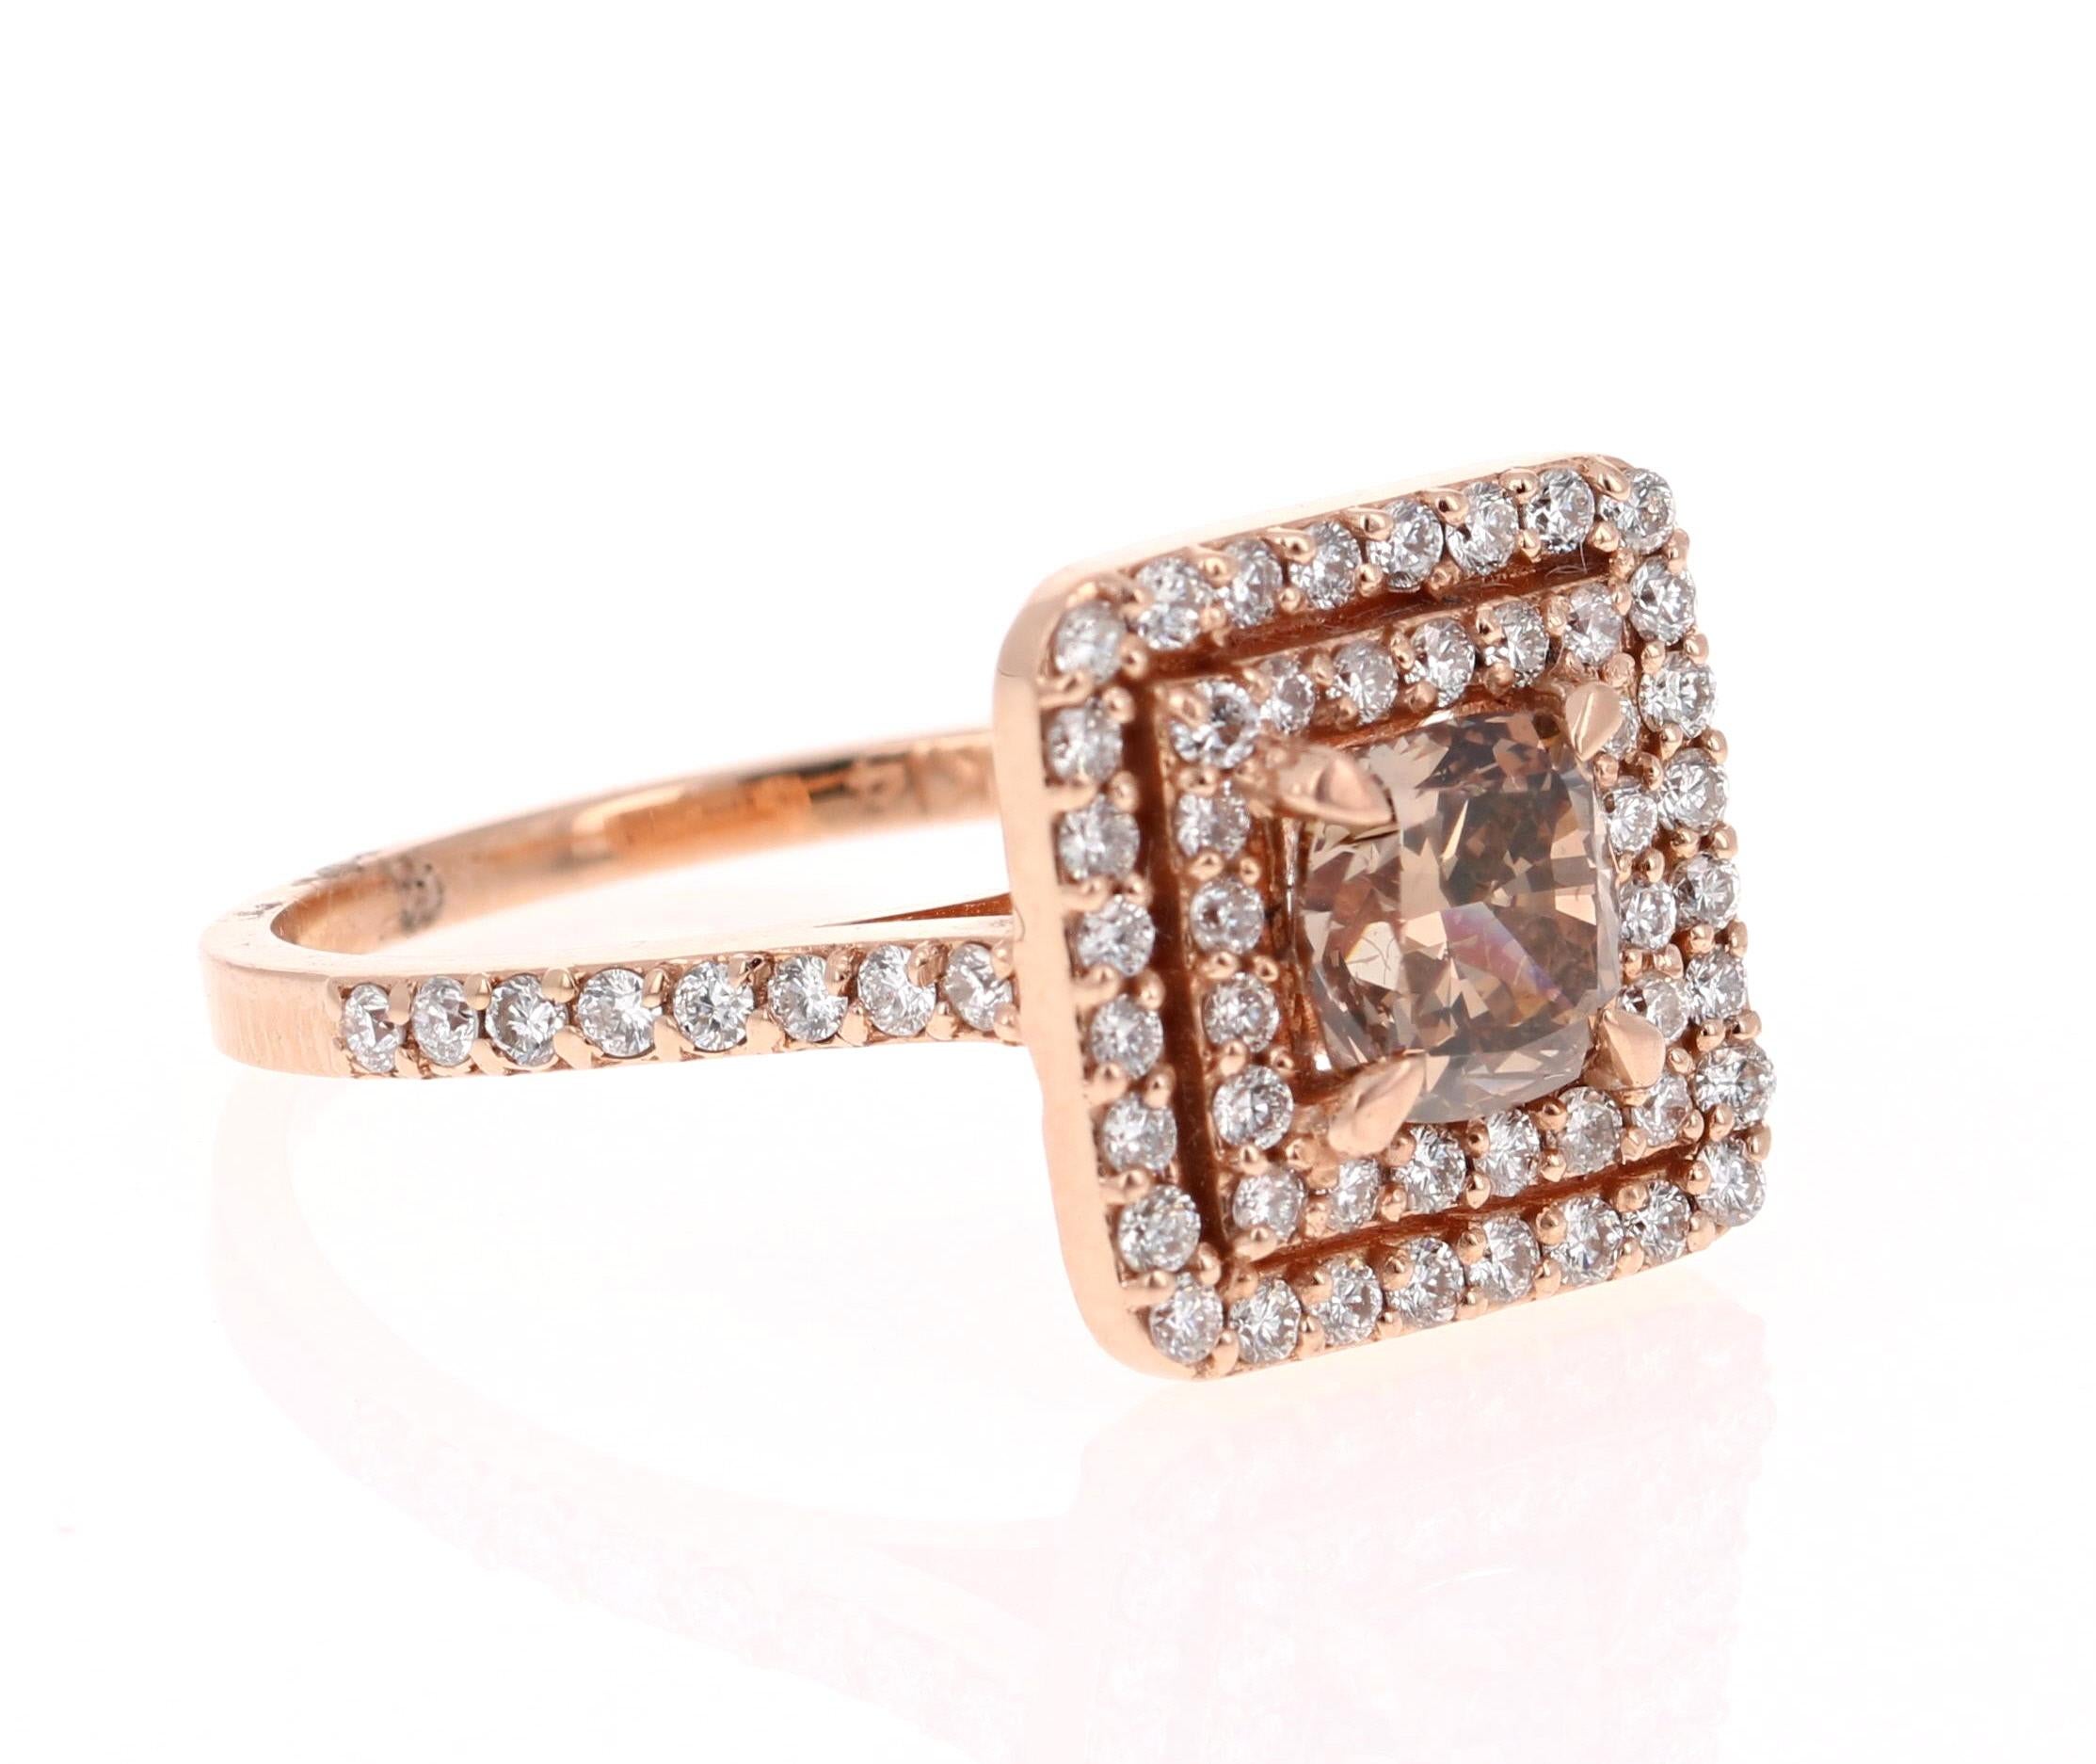 Stunningly Unique and Bold!

This beauty has a Champagne colored natural Cushion Cut Diamond that weighs 1.11 Carats. There is a double halo of 64 Round Cut Diamonds that weigh 0.62 Carats. The total carat weight of the ring is 1.73 Carats. 

The